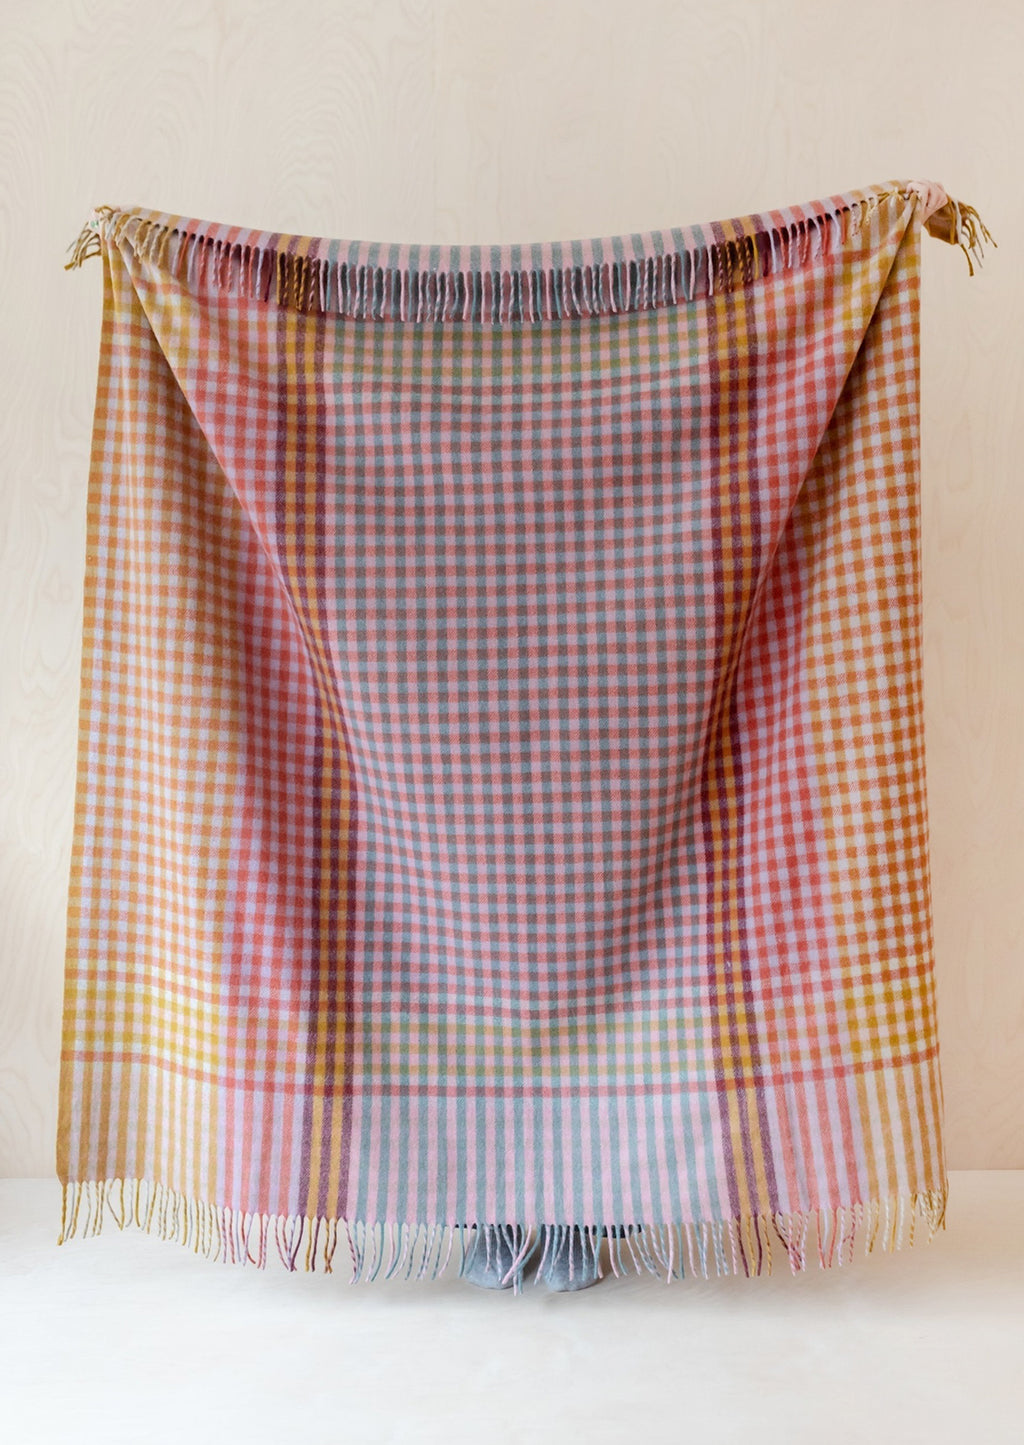 1: A colorful gingham check blanket in tones of lilac, magenta, and yellow.